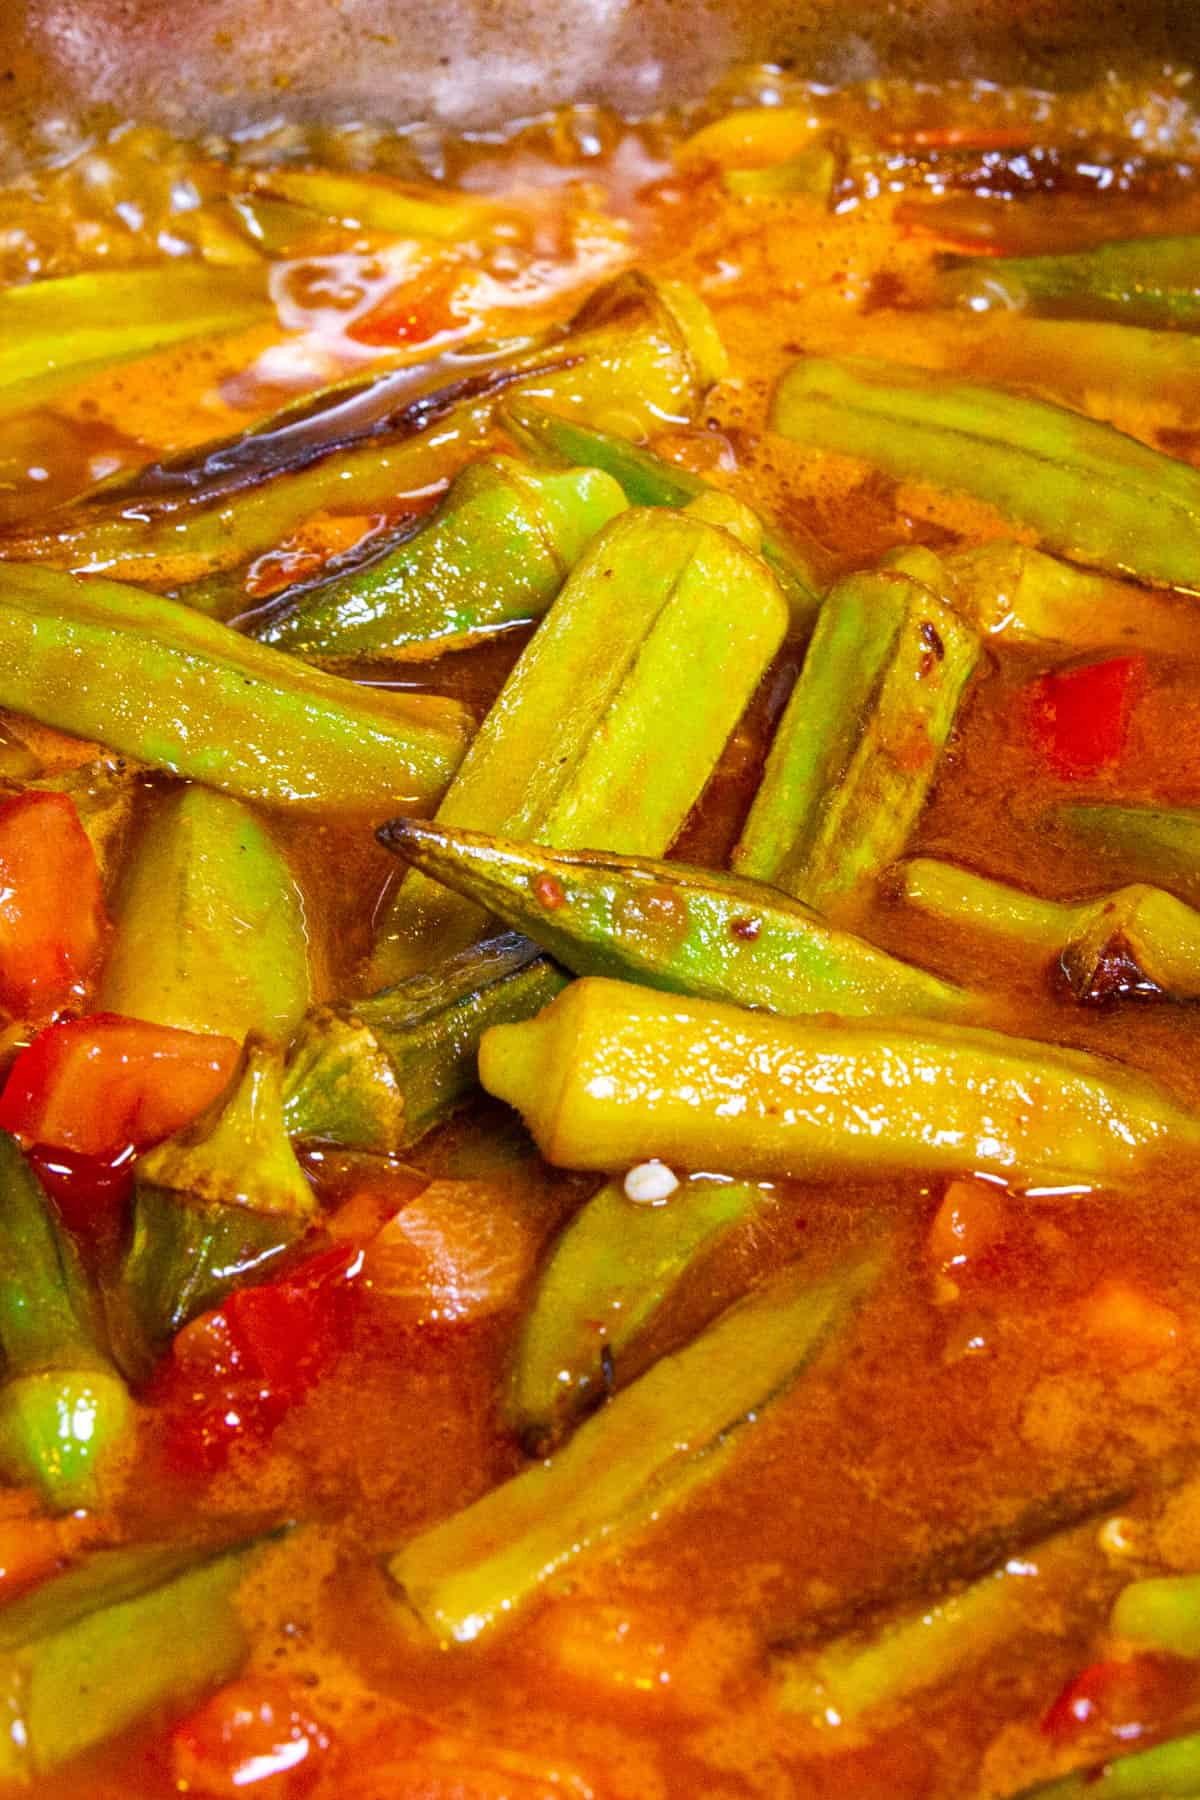 A close up shot of the stewed okra.